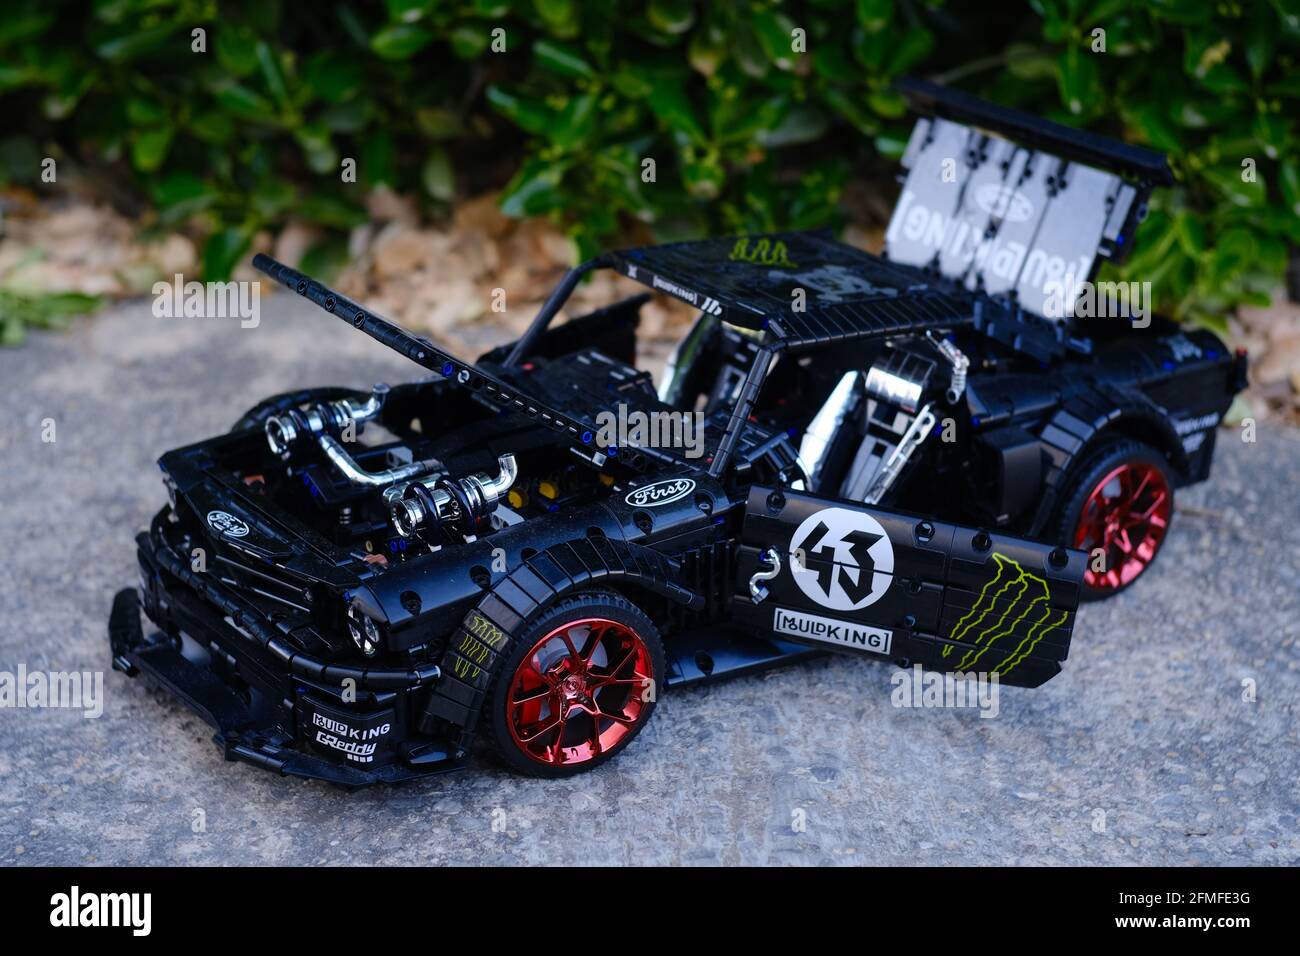 Black and white Mouldking Ford Mustang Hoonicorn Lego Set Stock Photo -  Alamy